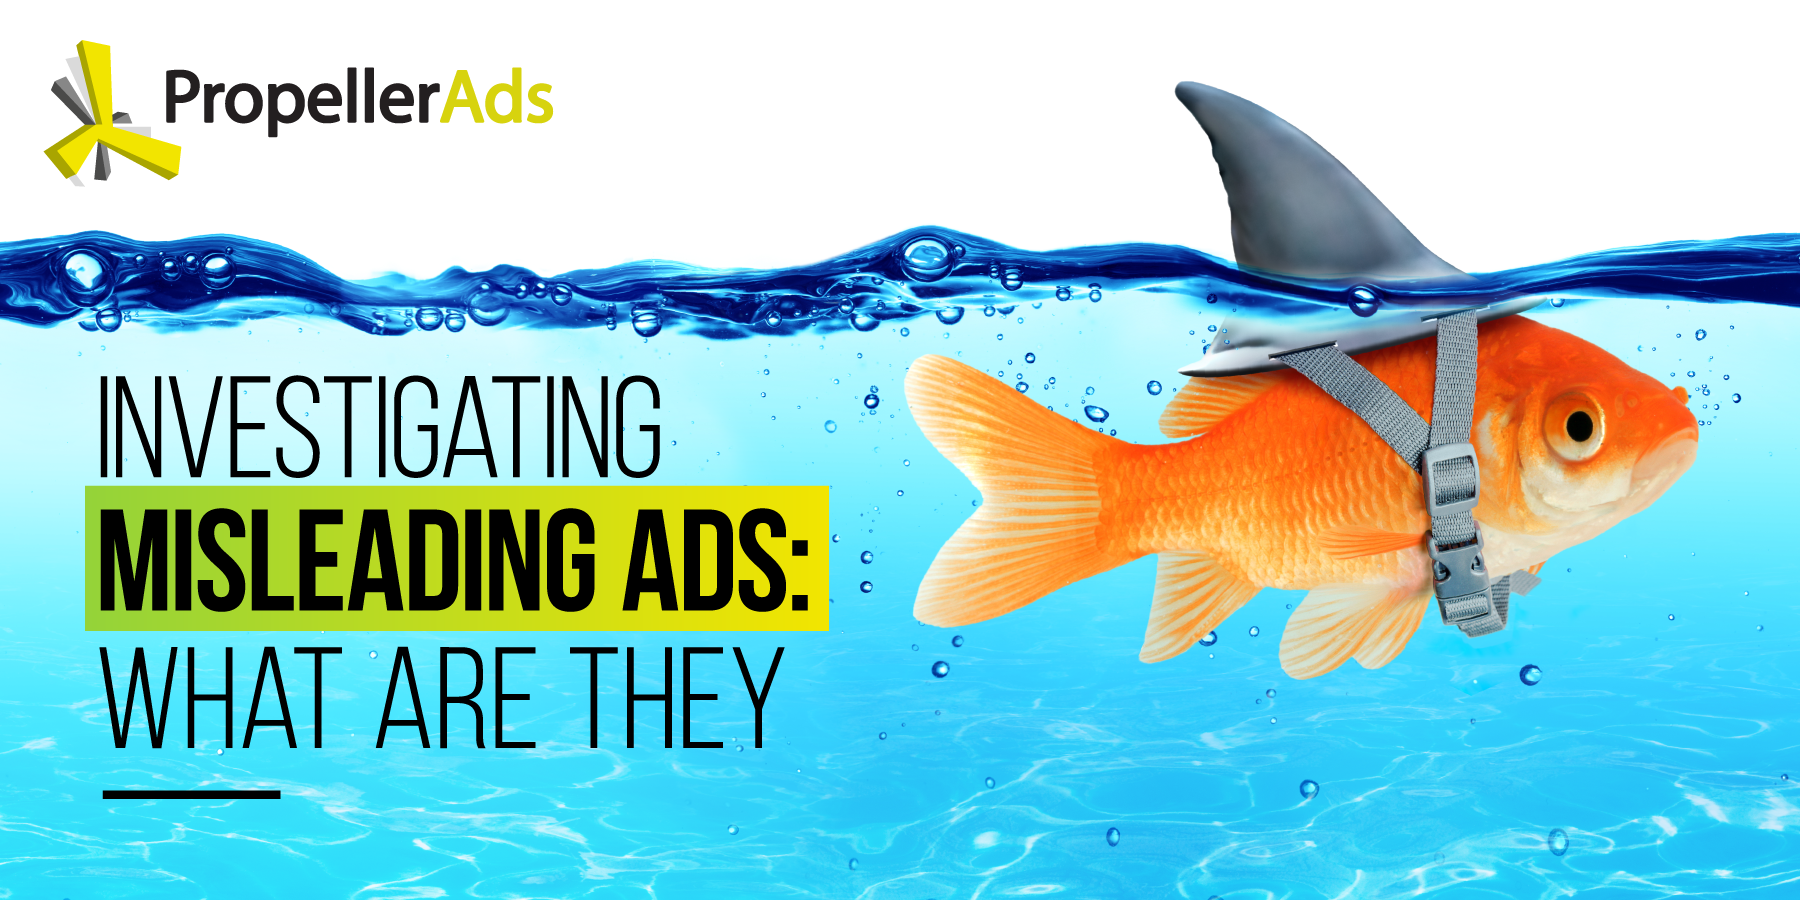 ads that deceptive or unethical